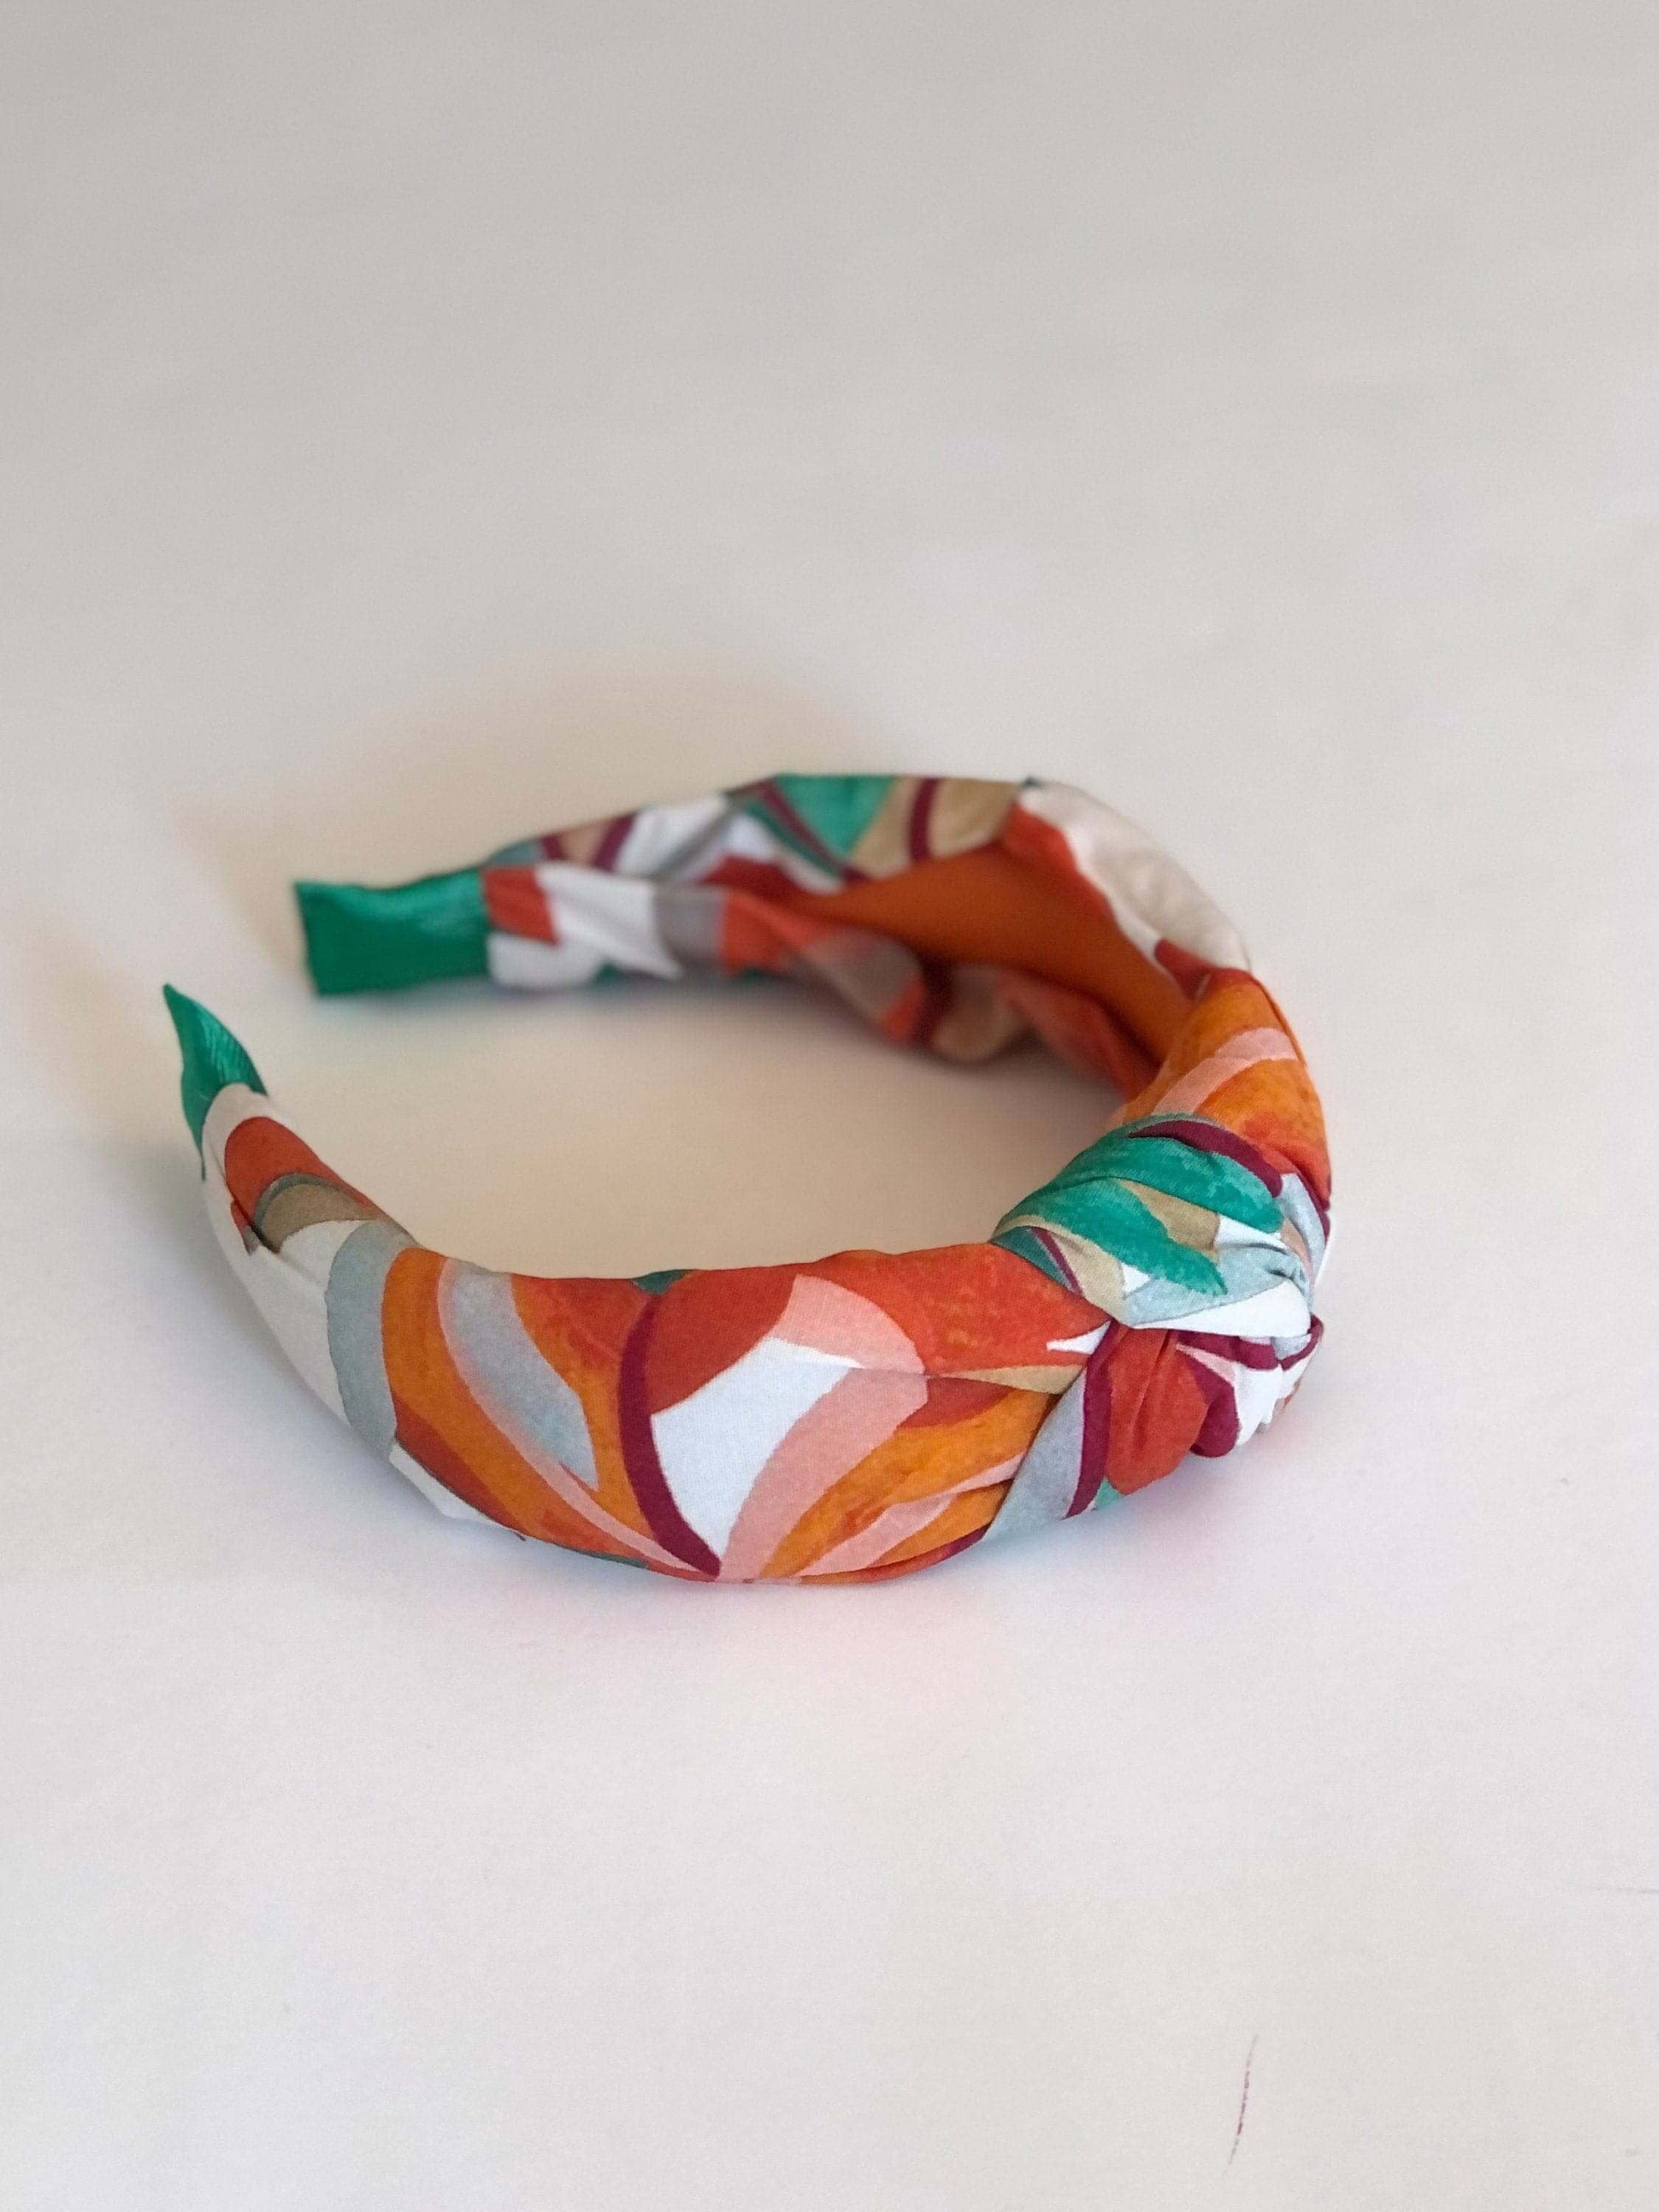 Treat her to a stylish and comfortable hair accessory with this knotted headband in a unique cream, orange, and green colorway.